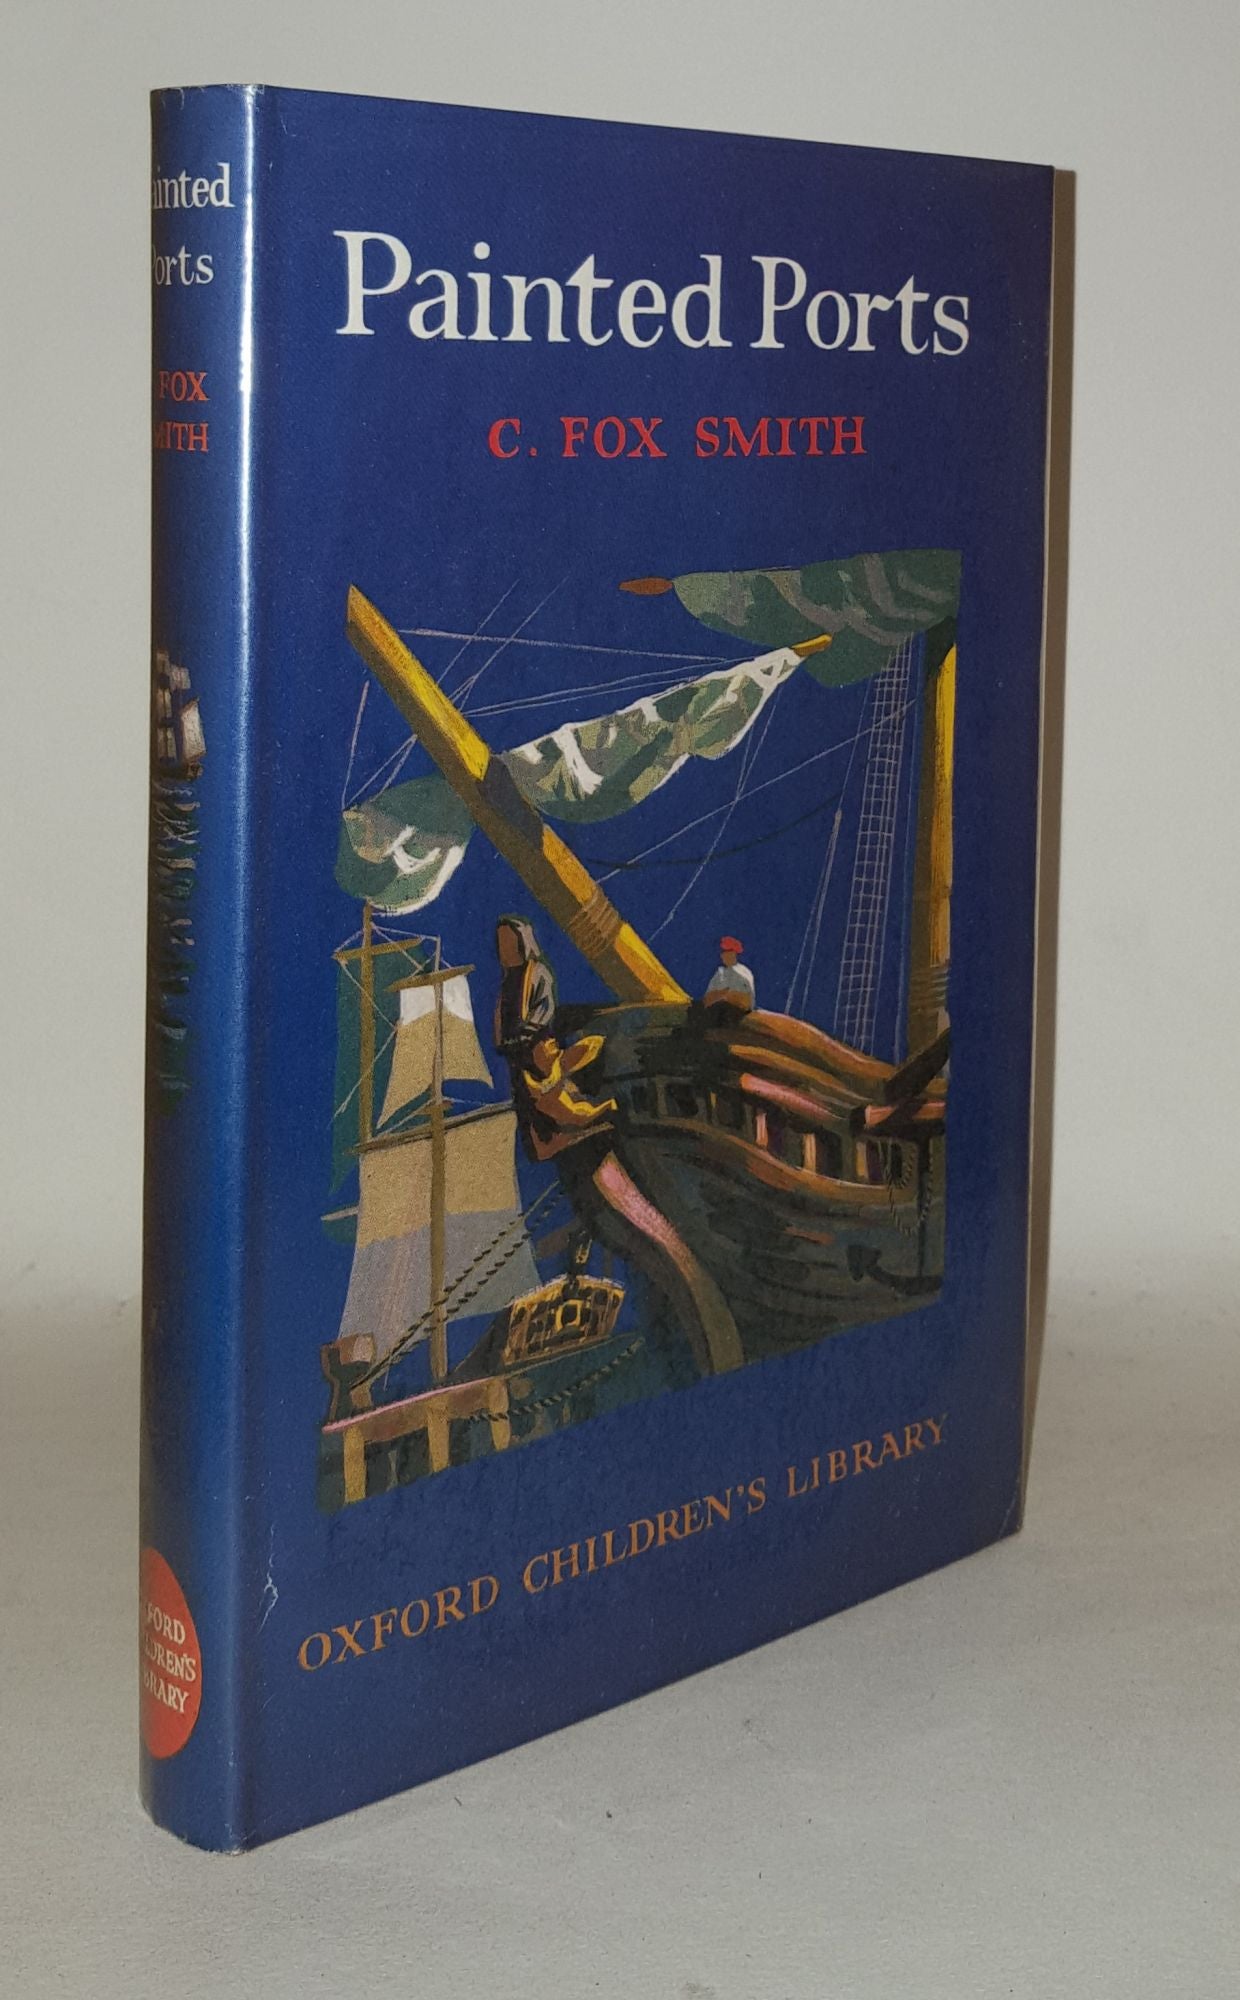 FOX SMITH C. - Painted Ports